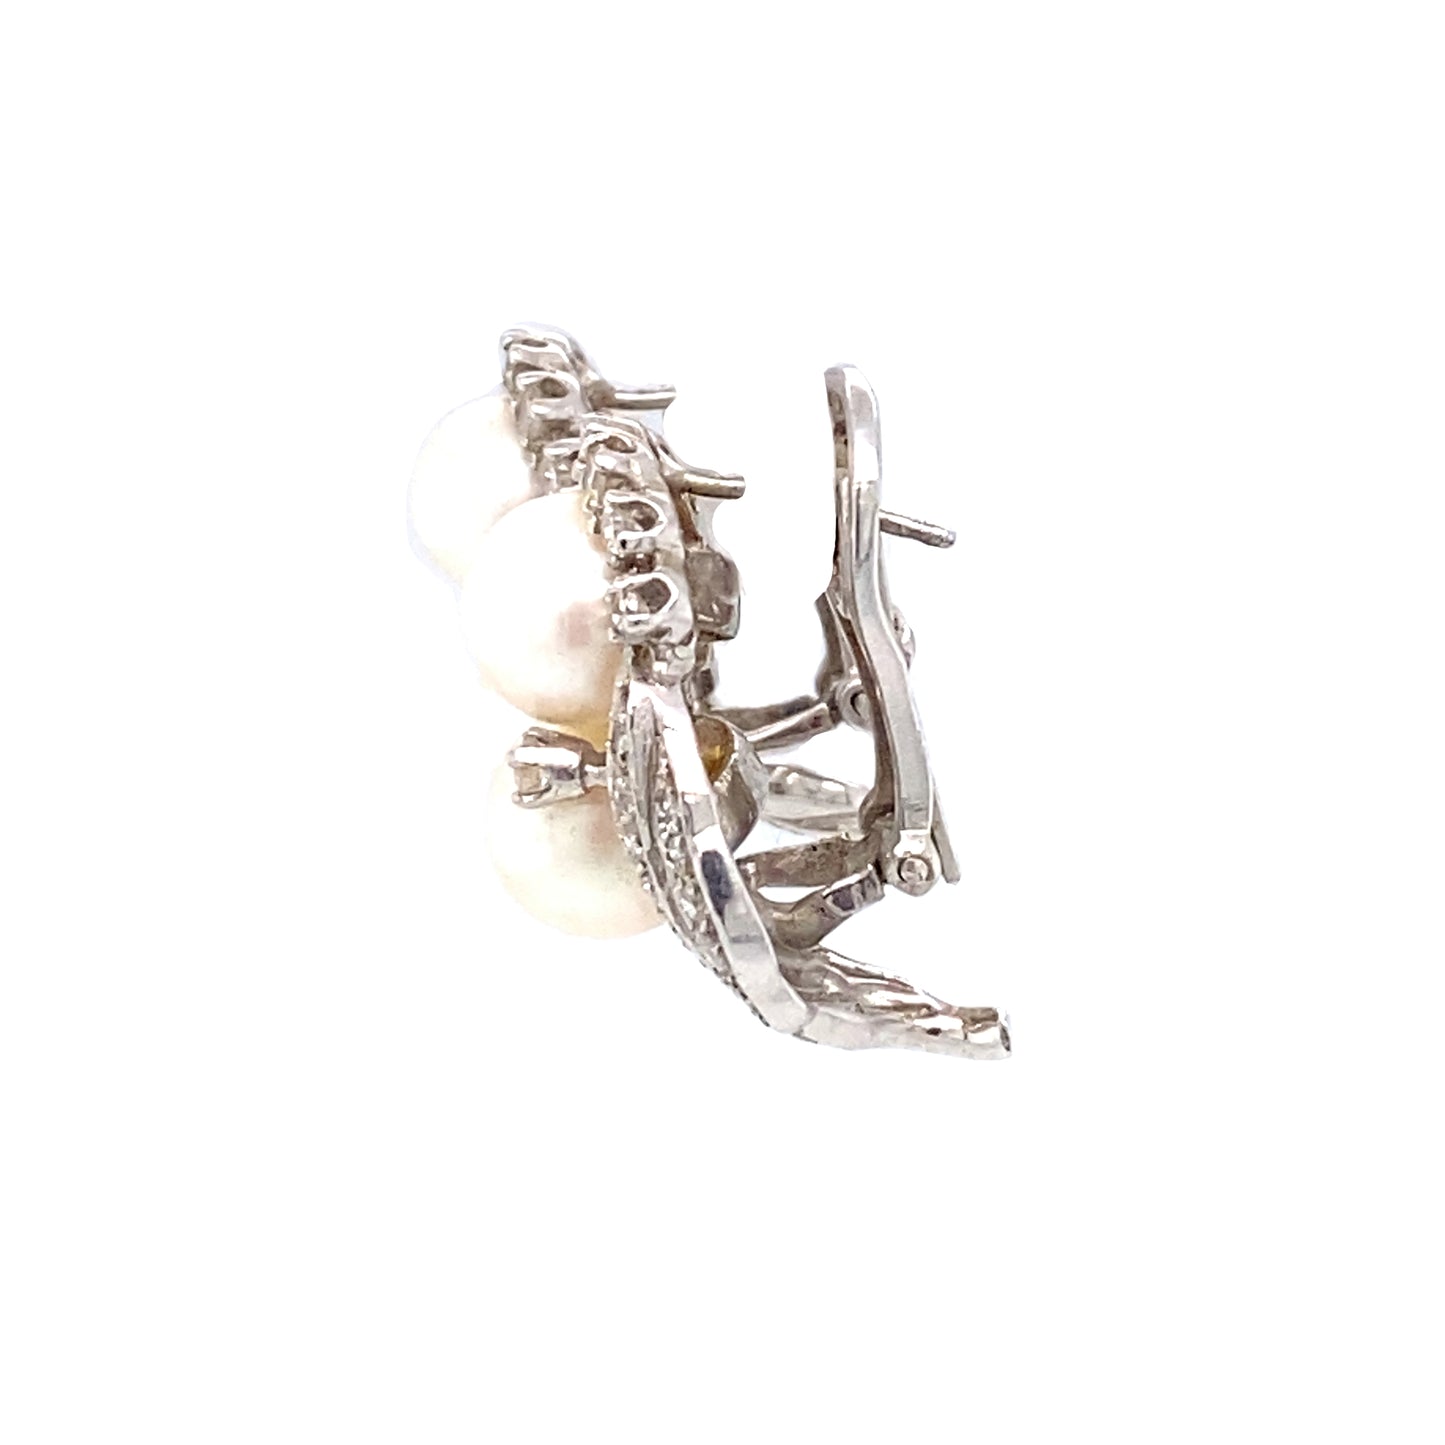 Circa 1920 1.0ct Diamond and Pearl Earrings in 14K White Gold